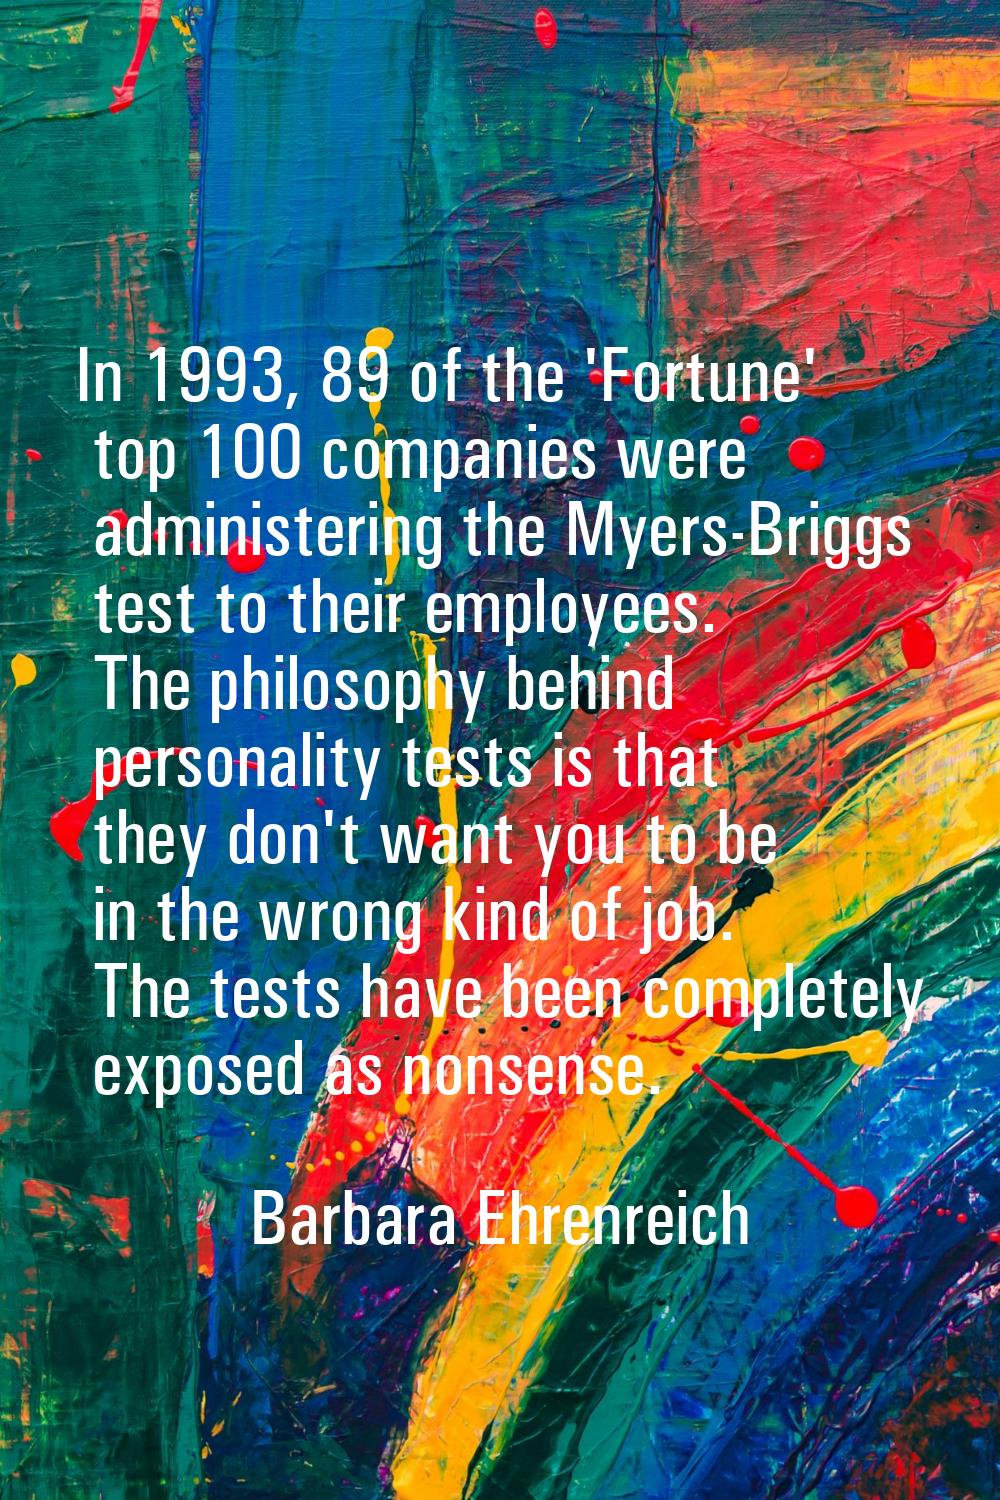 In 1993, 89 of the 'Fortune' top 100 companies were administering the Myers-Briggs test to their em